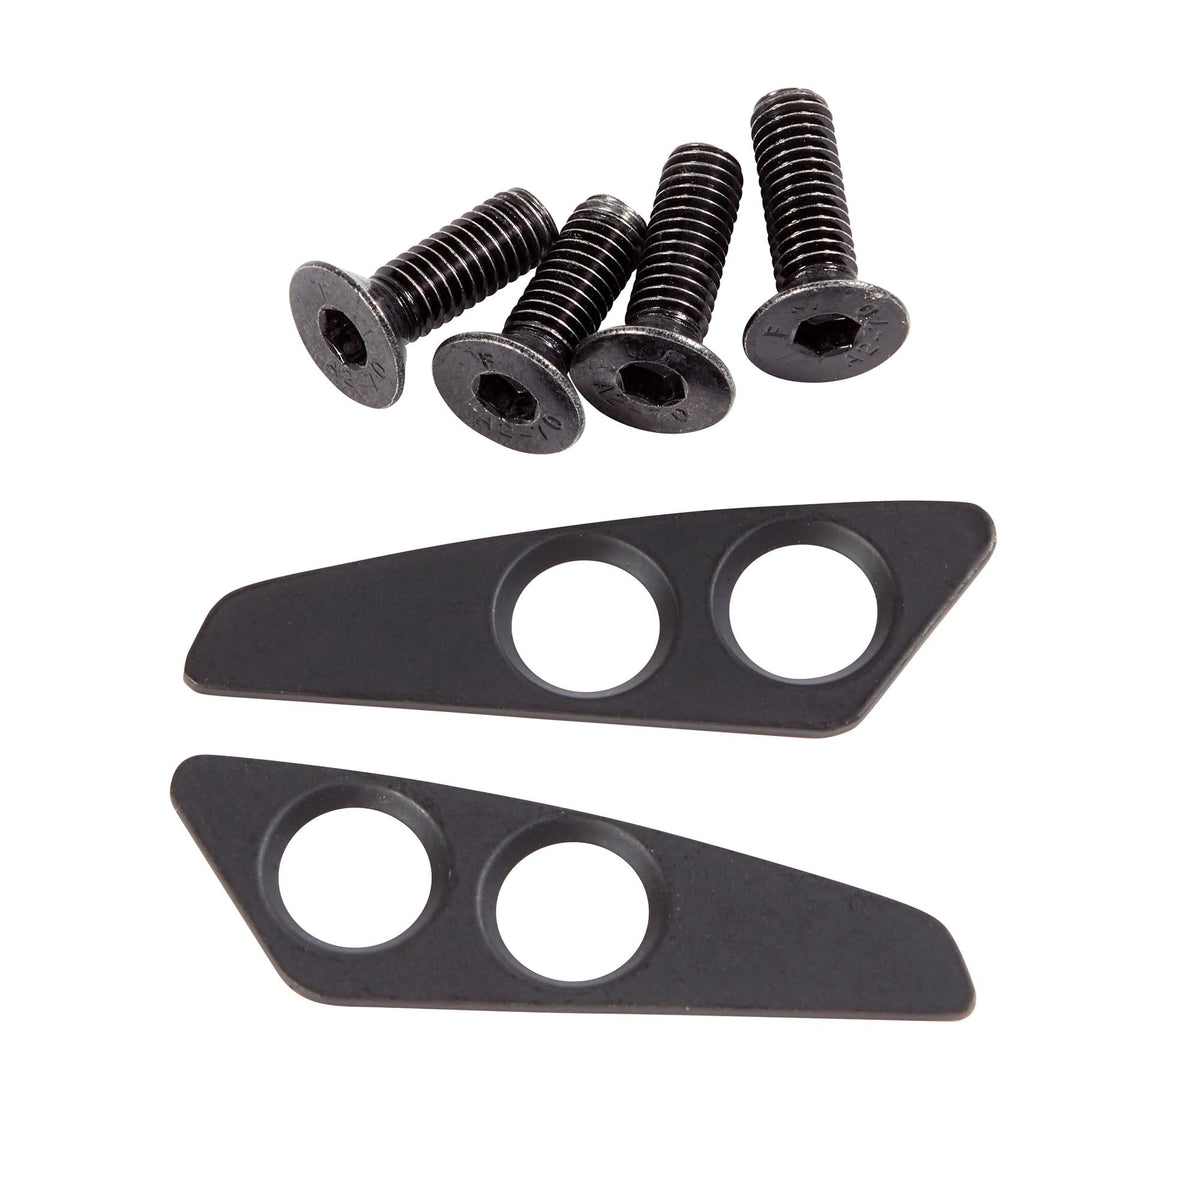 Replacement Motor Driver Screws / Wings for Boosted Boards - Boosted USA